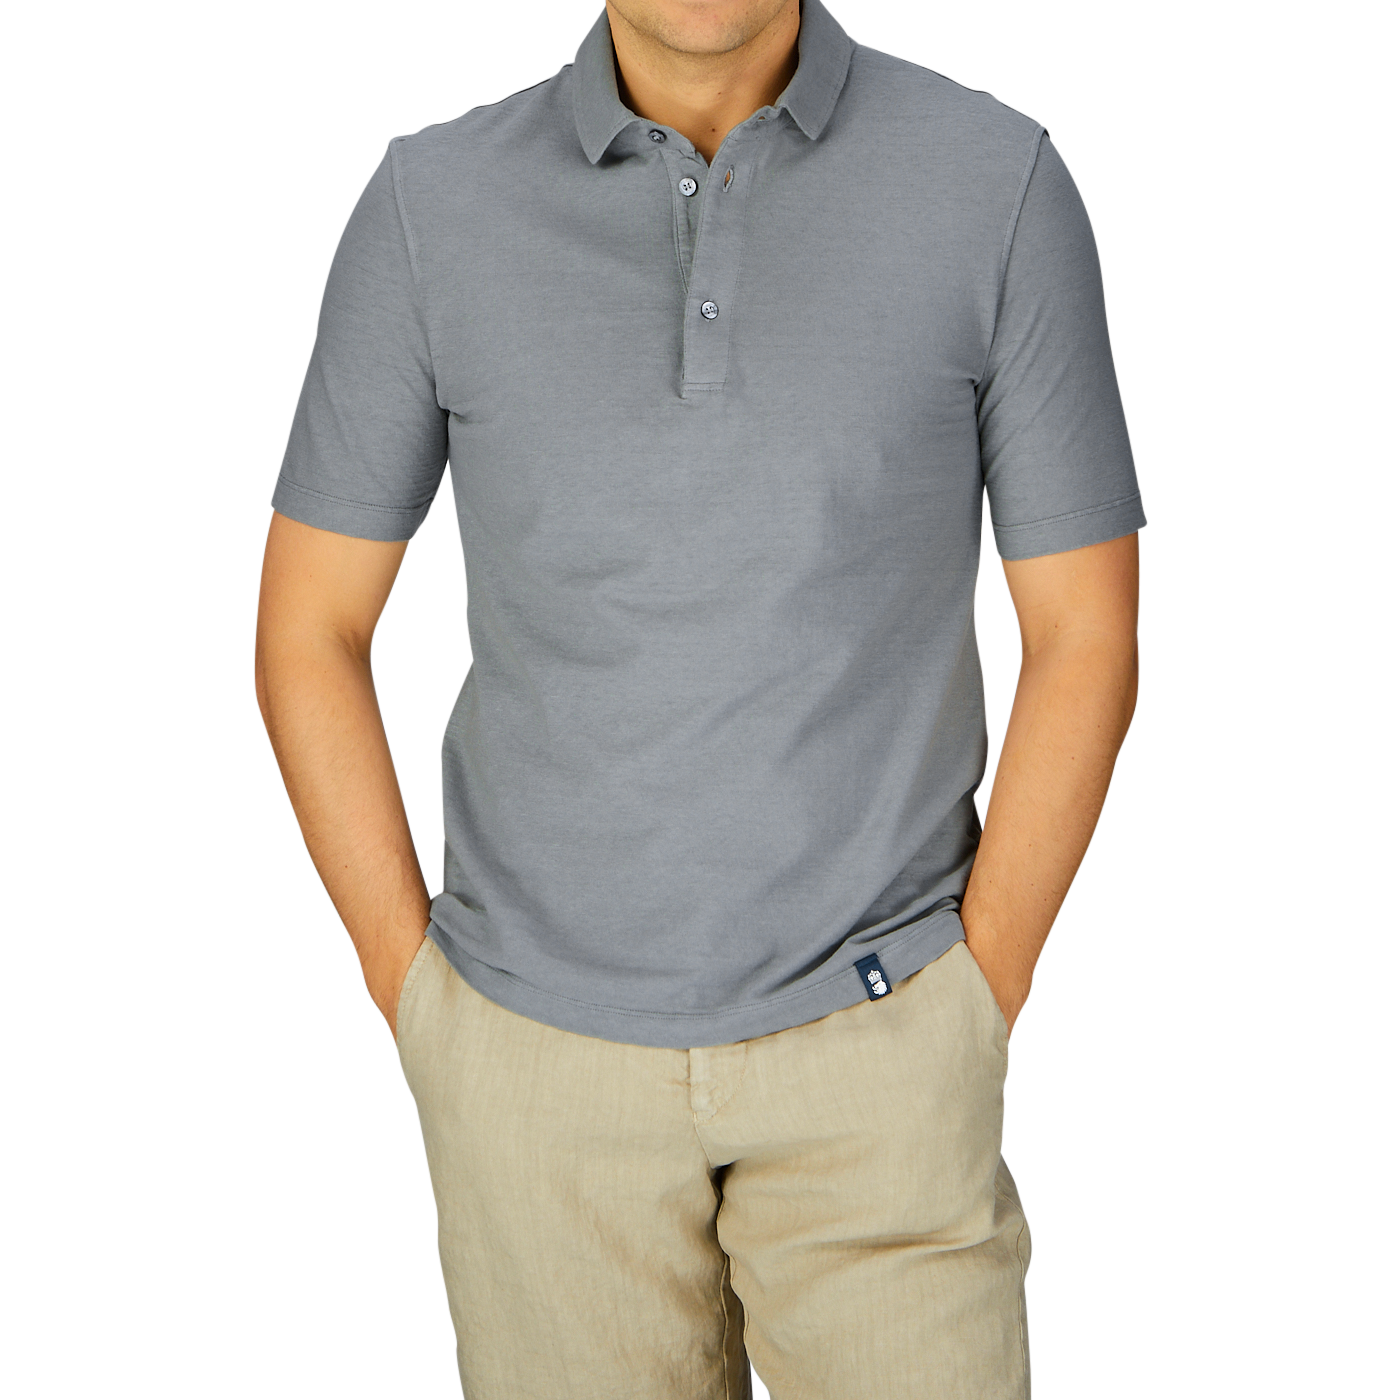 Man wearing a Drumohr steel grey cotton linen polo shirt and beige pants against a gray background.